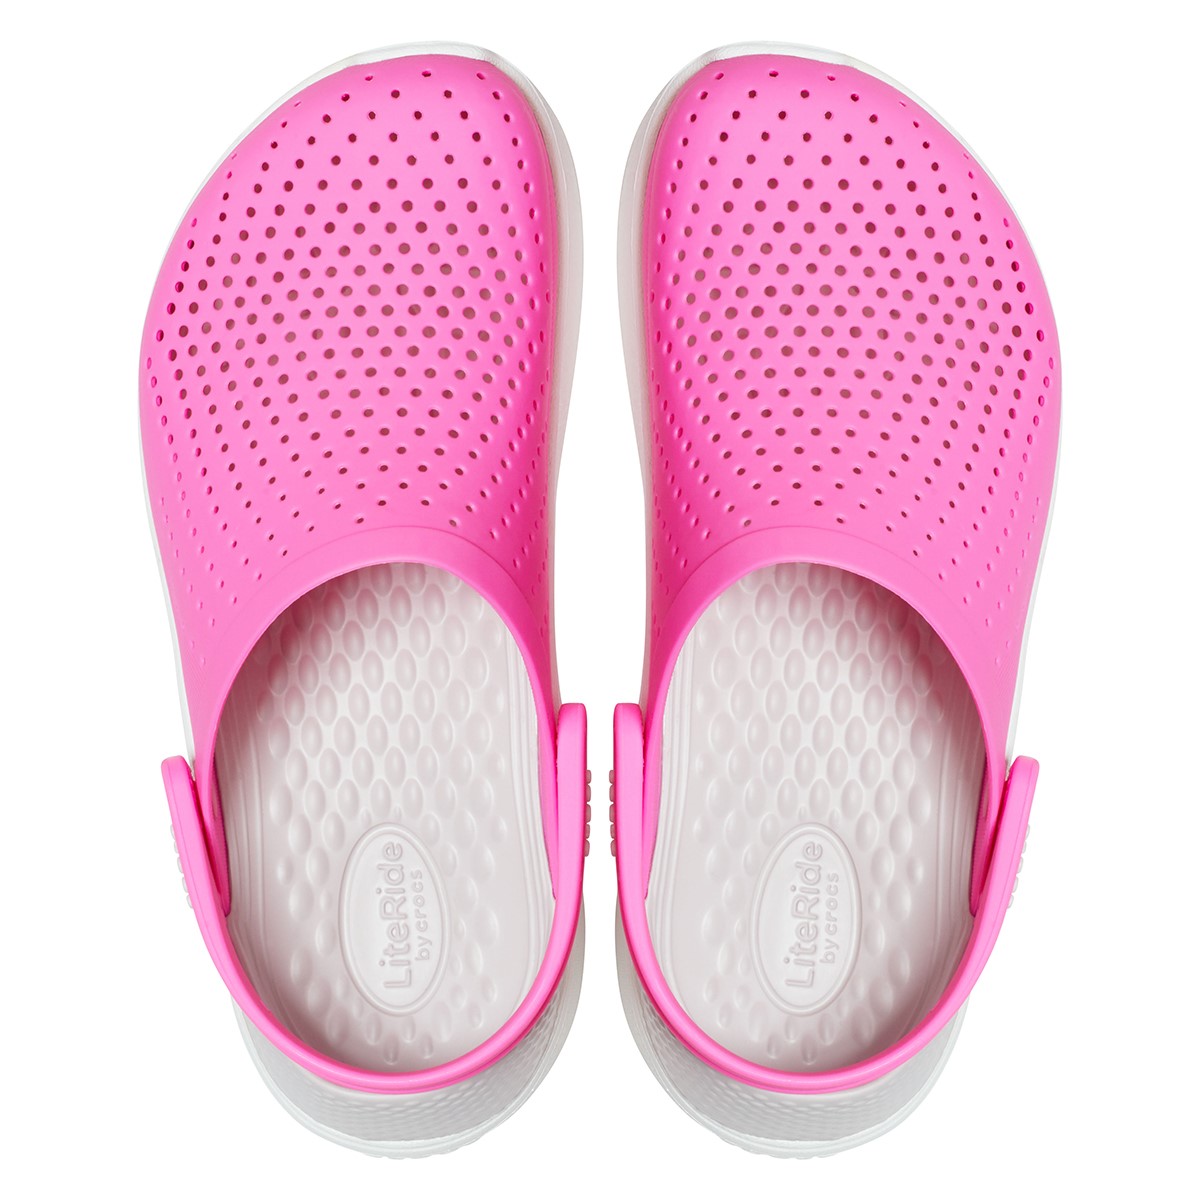 Crocs Unisex Sandalet 204592 Electric Pink/Almost White